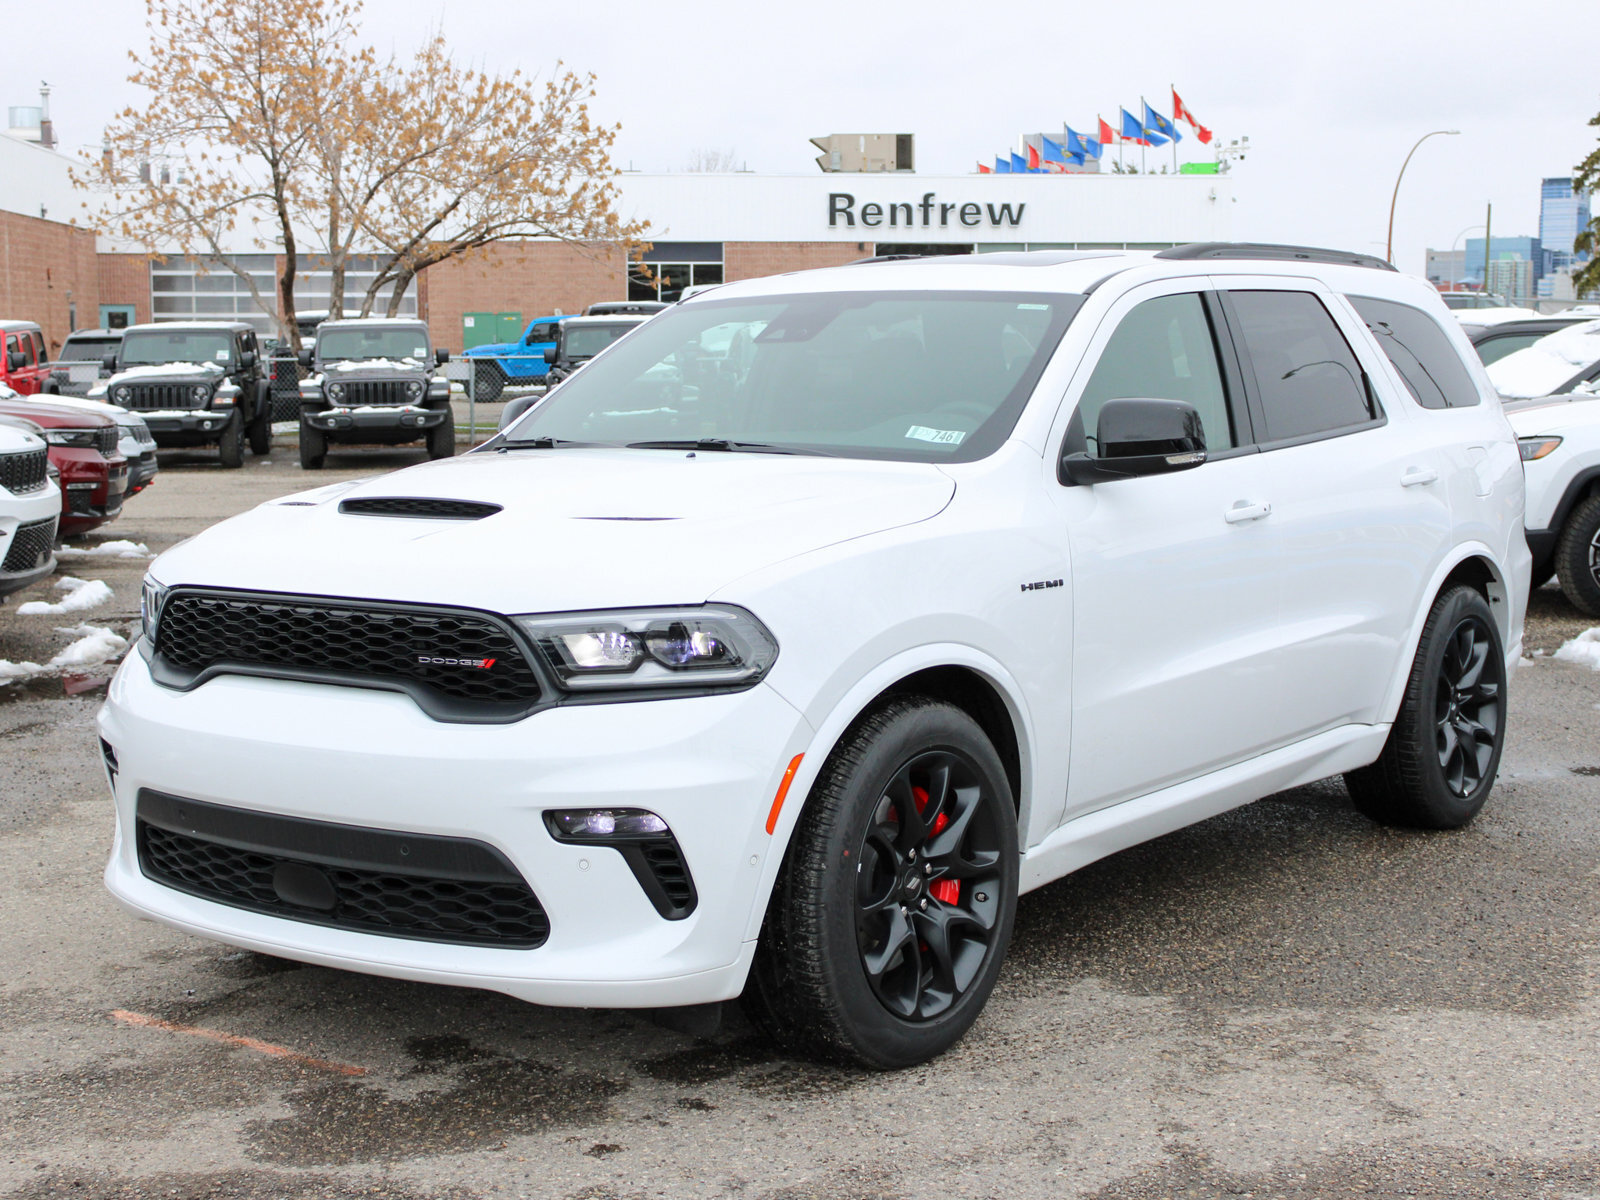 2023 Dodge Durango FULLY LOADED GHOST EDITION! BREMO BRAKES, SUN ROOF